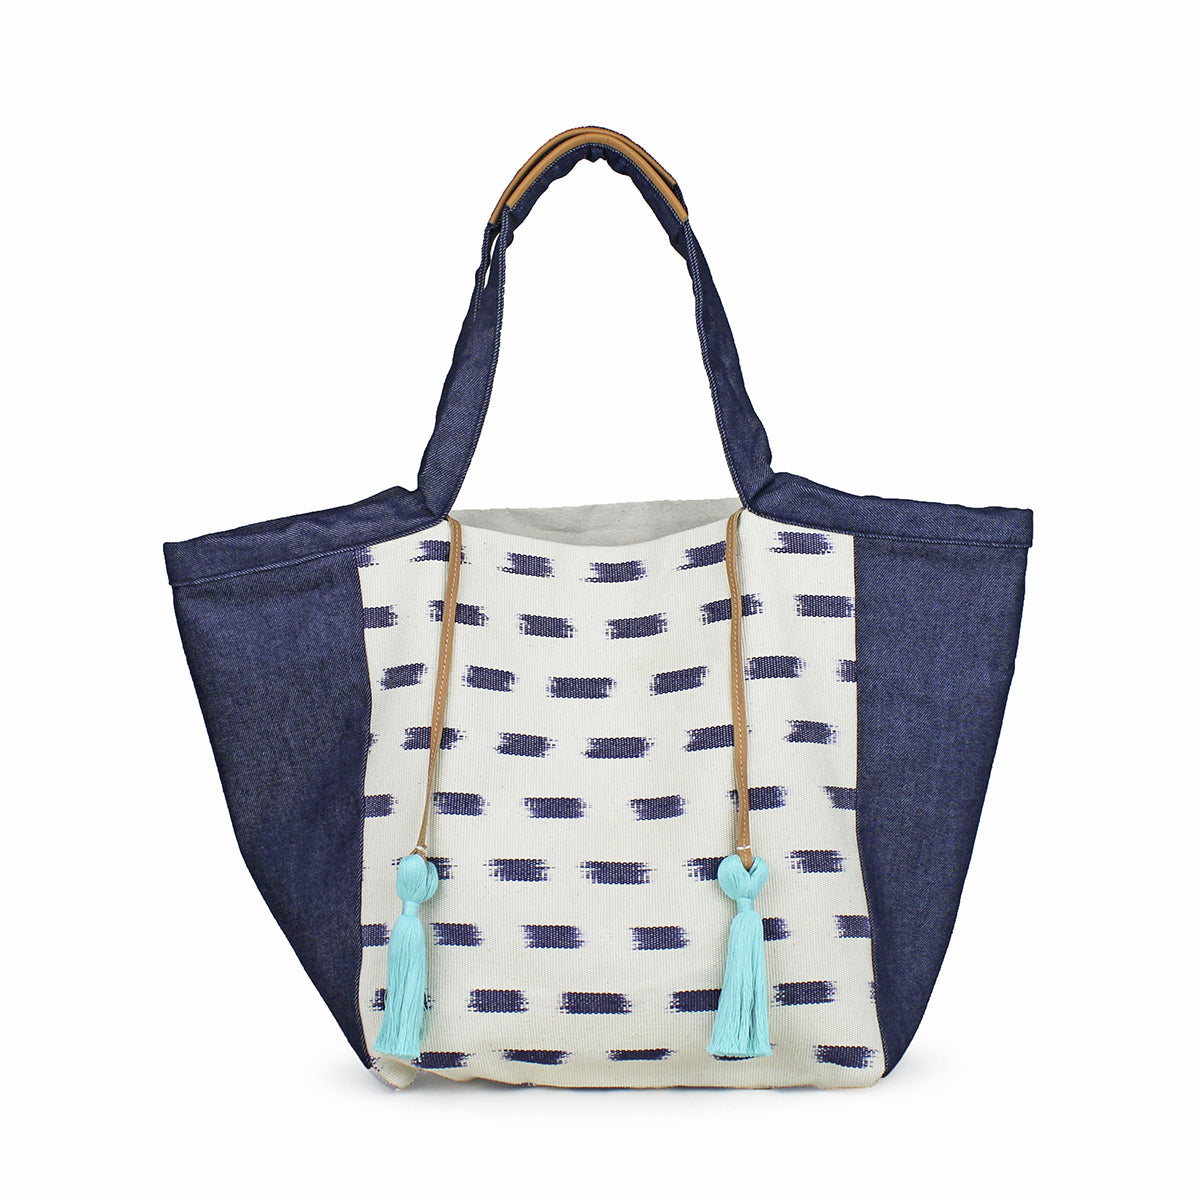 Artisan Rosa Handwoven Tote in Denim Jaspe. The center has an abstract blue square pattern over a white background. The sides have a dark denim wash fabric. The handles have leather detailing. It has two mint green tassels attached to leather cords.